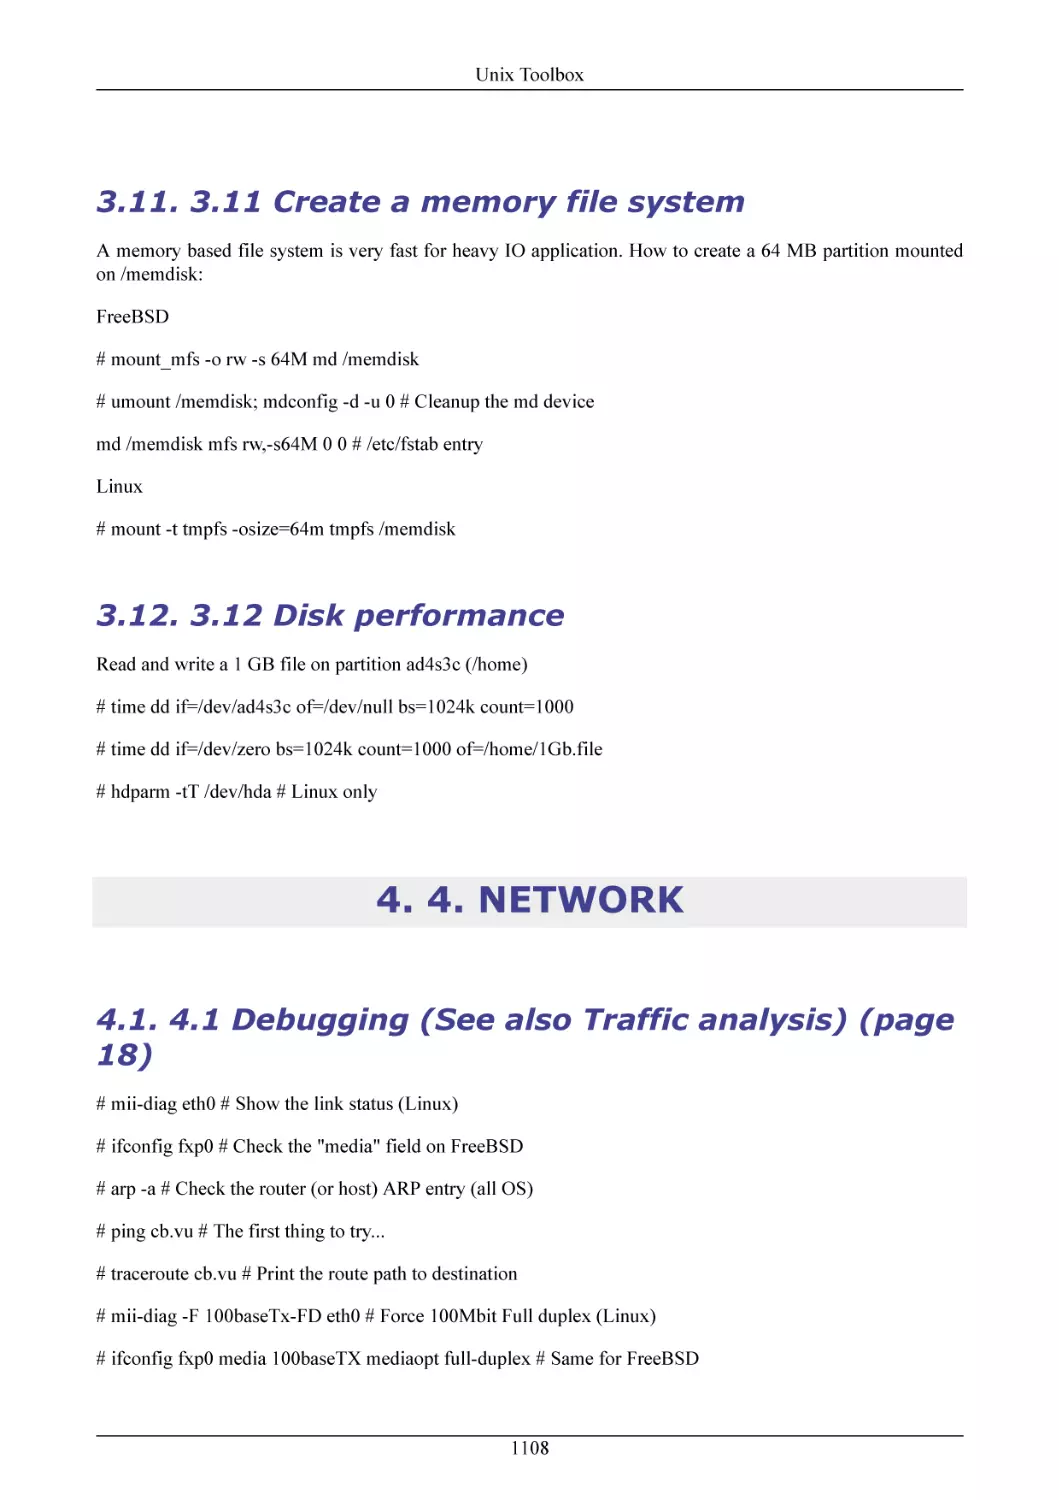 3.11 Create a memory file system
3.12 Disk performance
4. NETWORK
4.1 Debugging (See also Traffic analysis) (page 18)